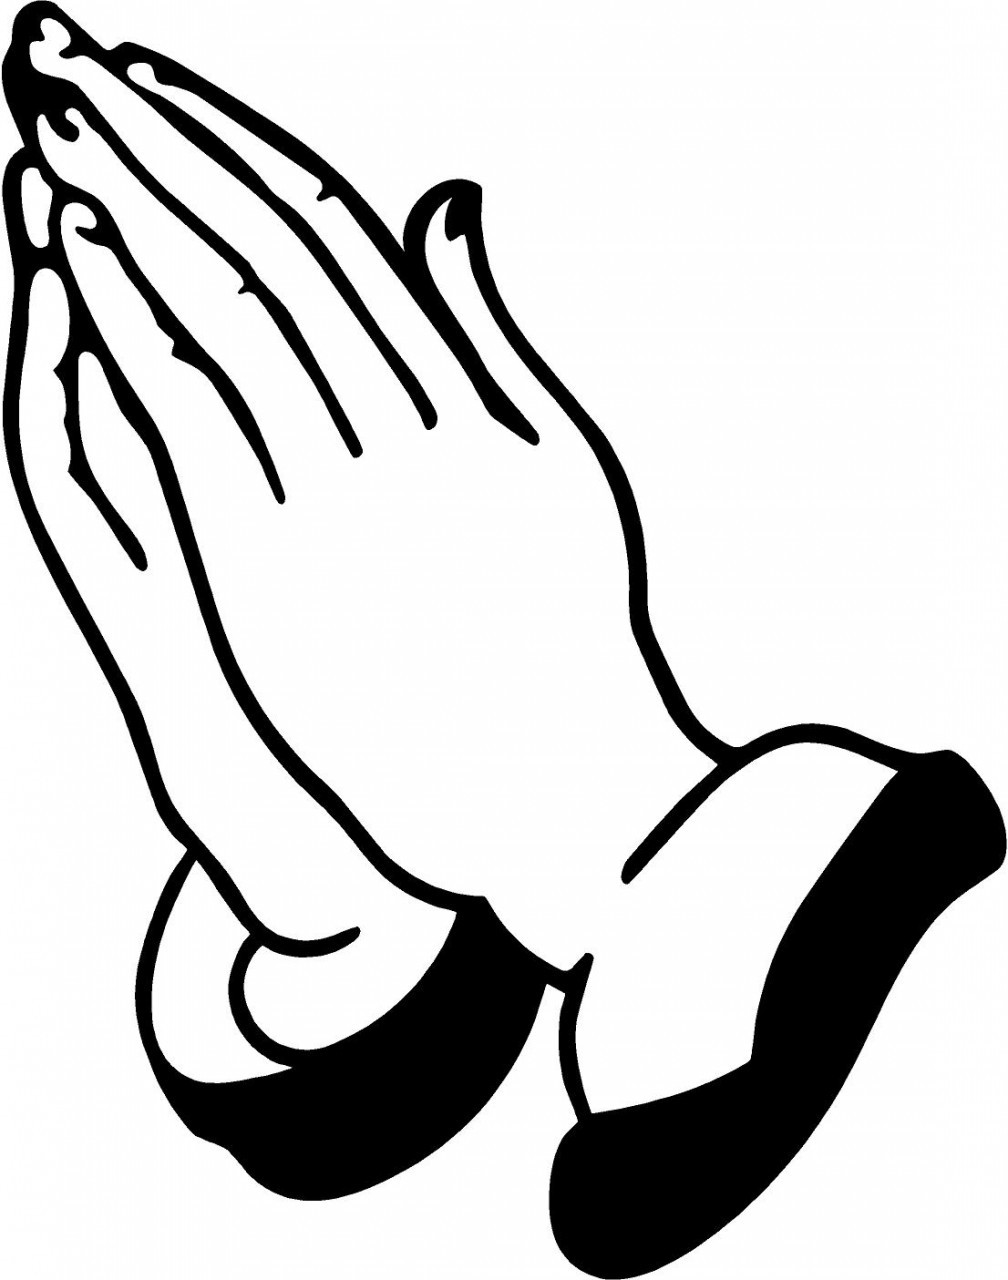 Coloring pages praying hands - Coloring Pages & Pictures - IMAGIXS